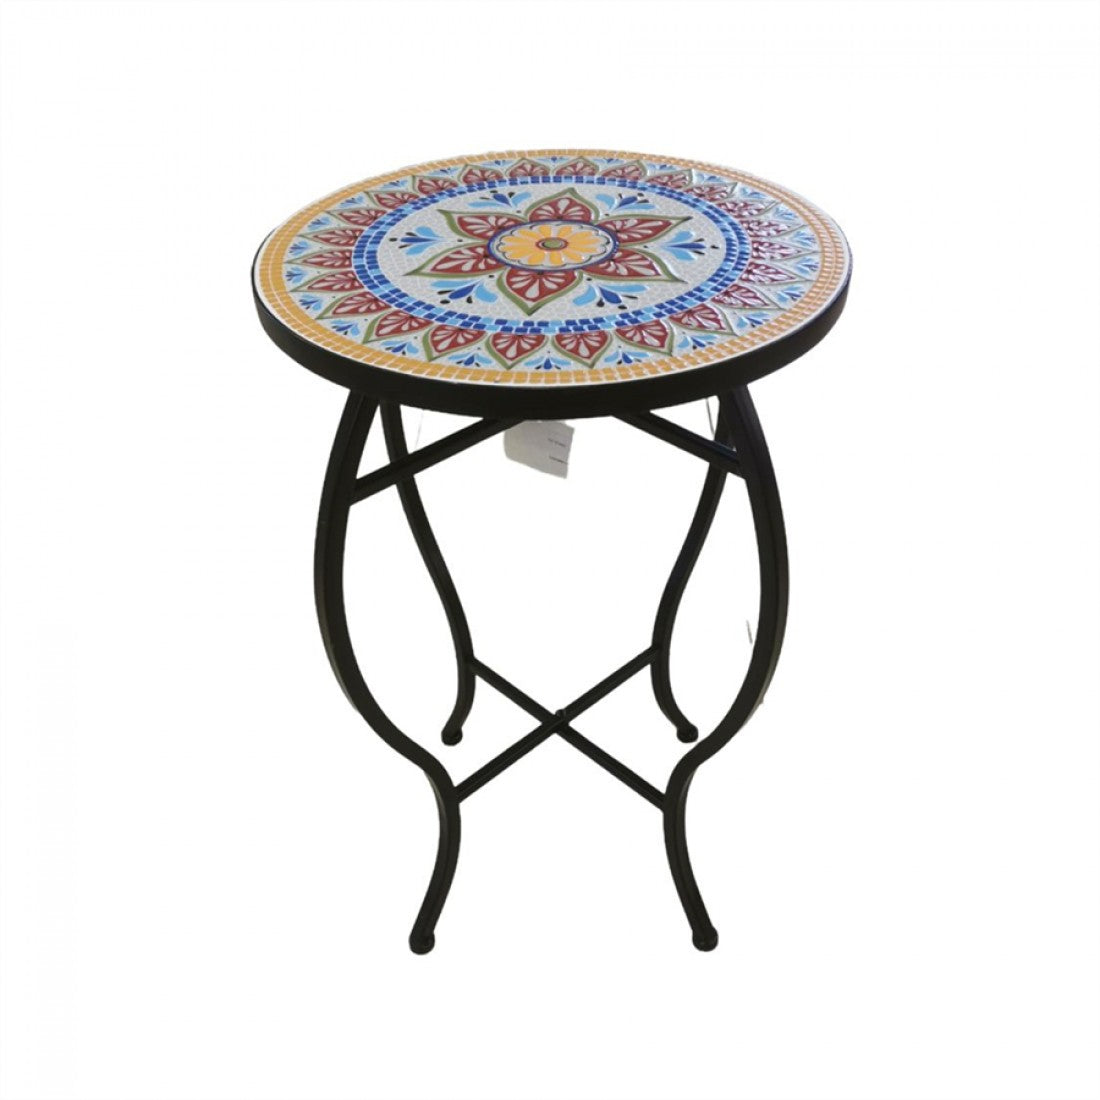 Red-Mosaic Flower Pot Stand Furniture  